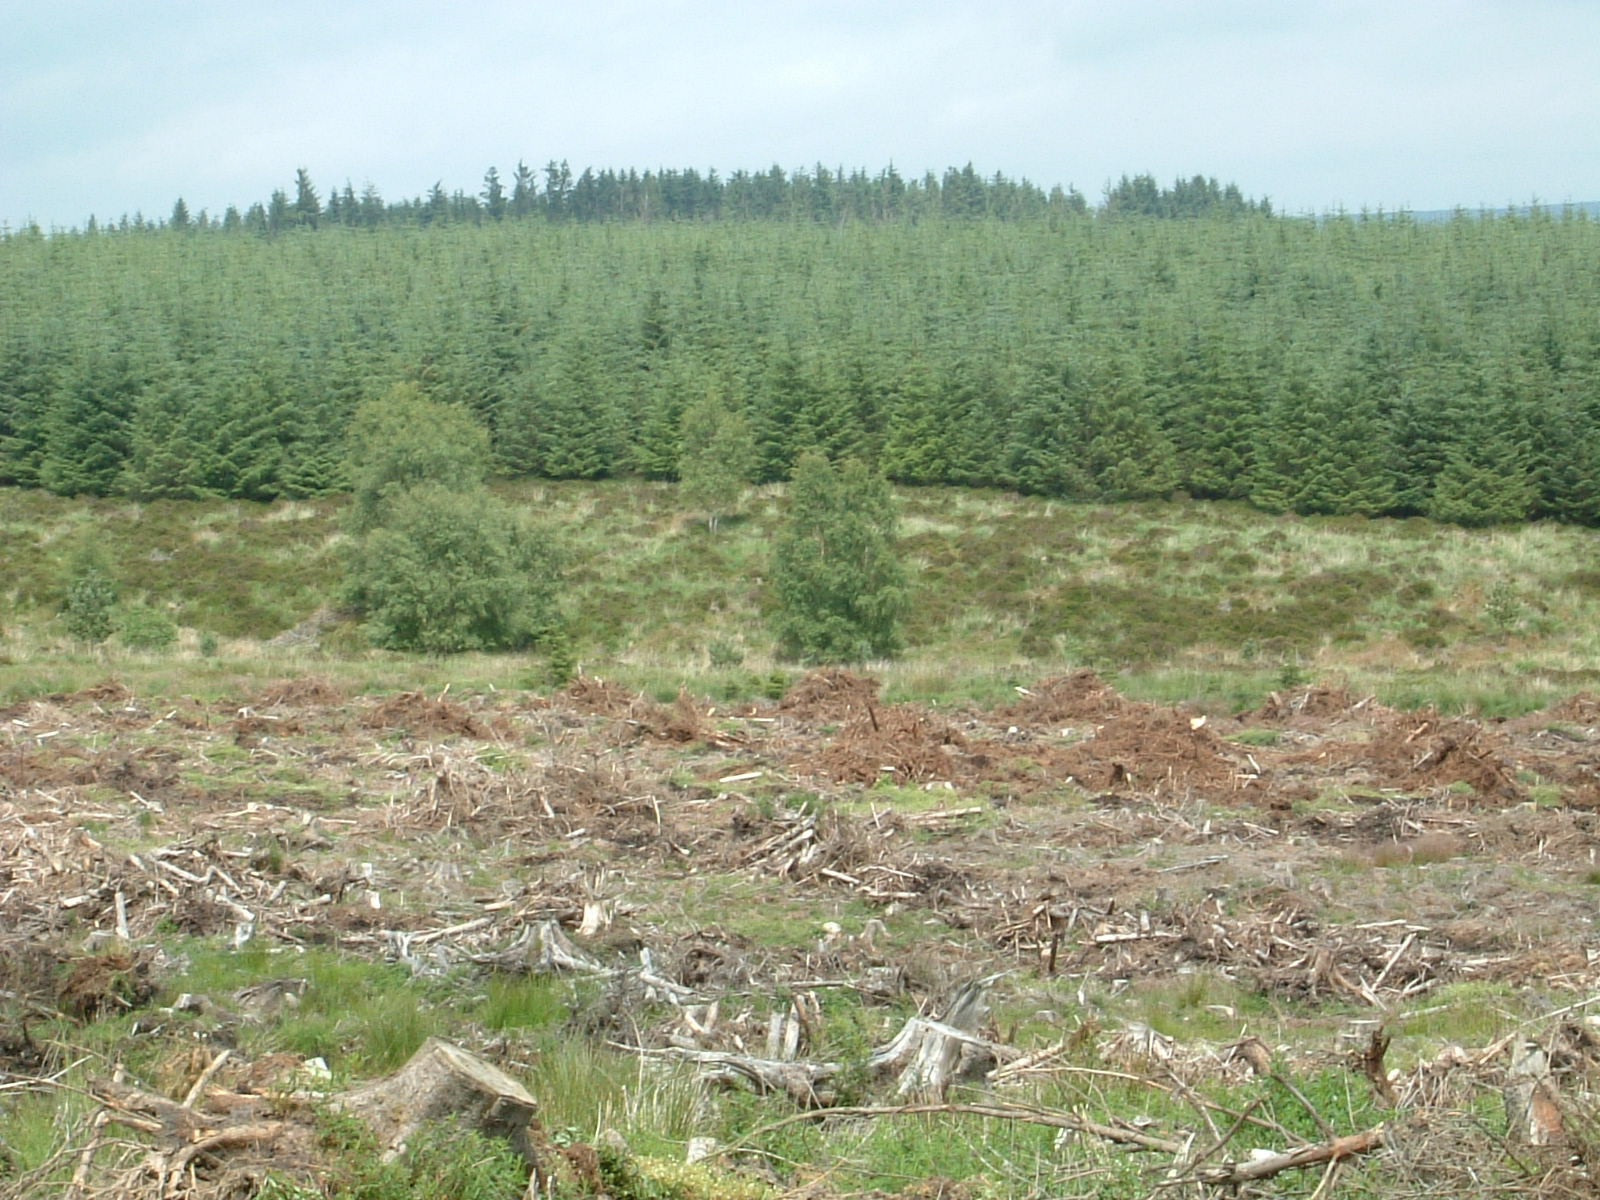 The forests of Kielder